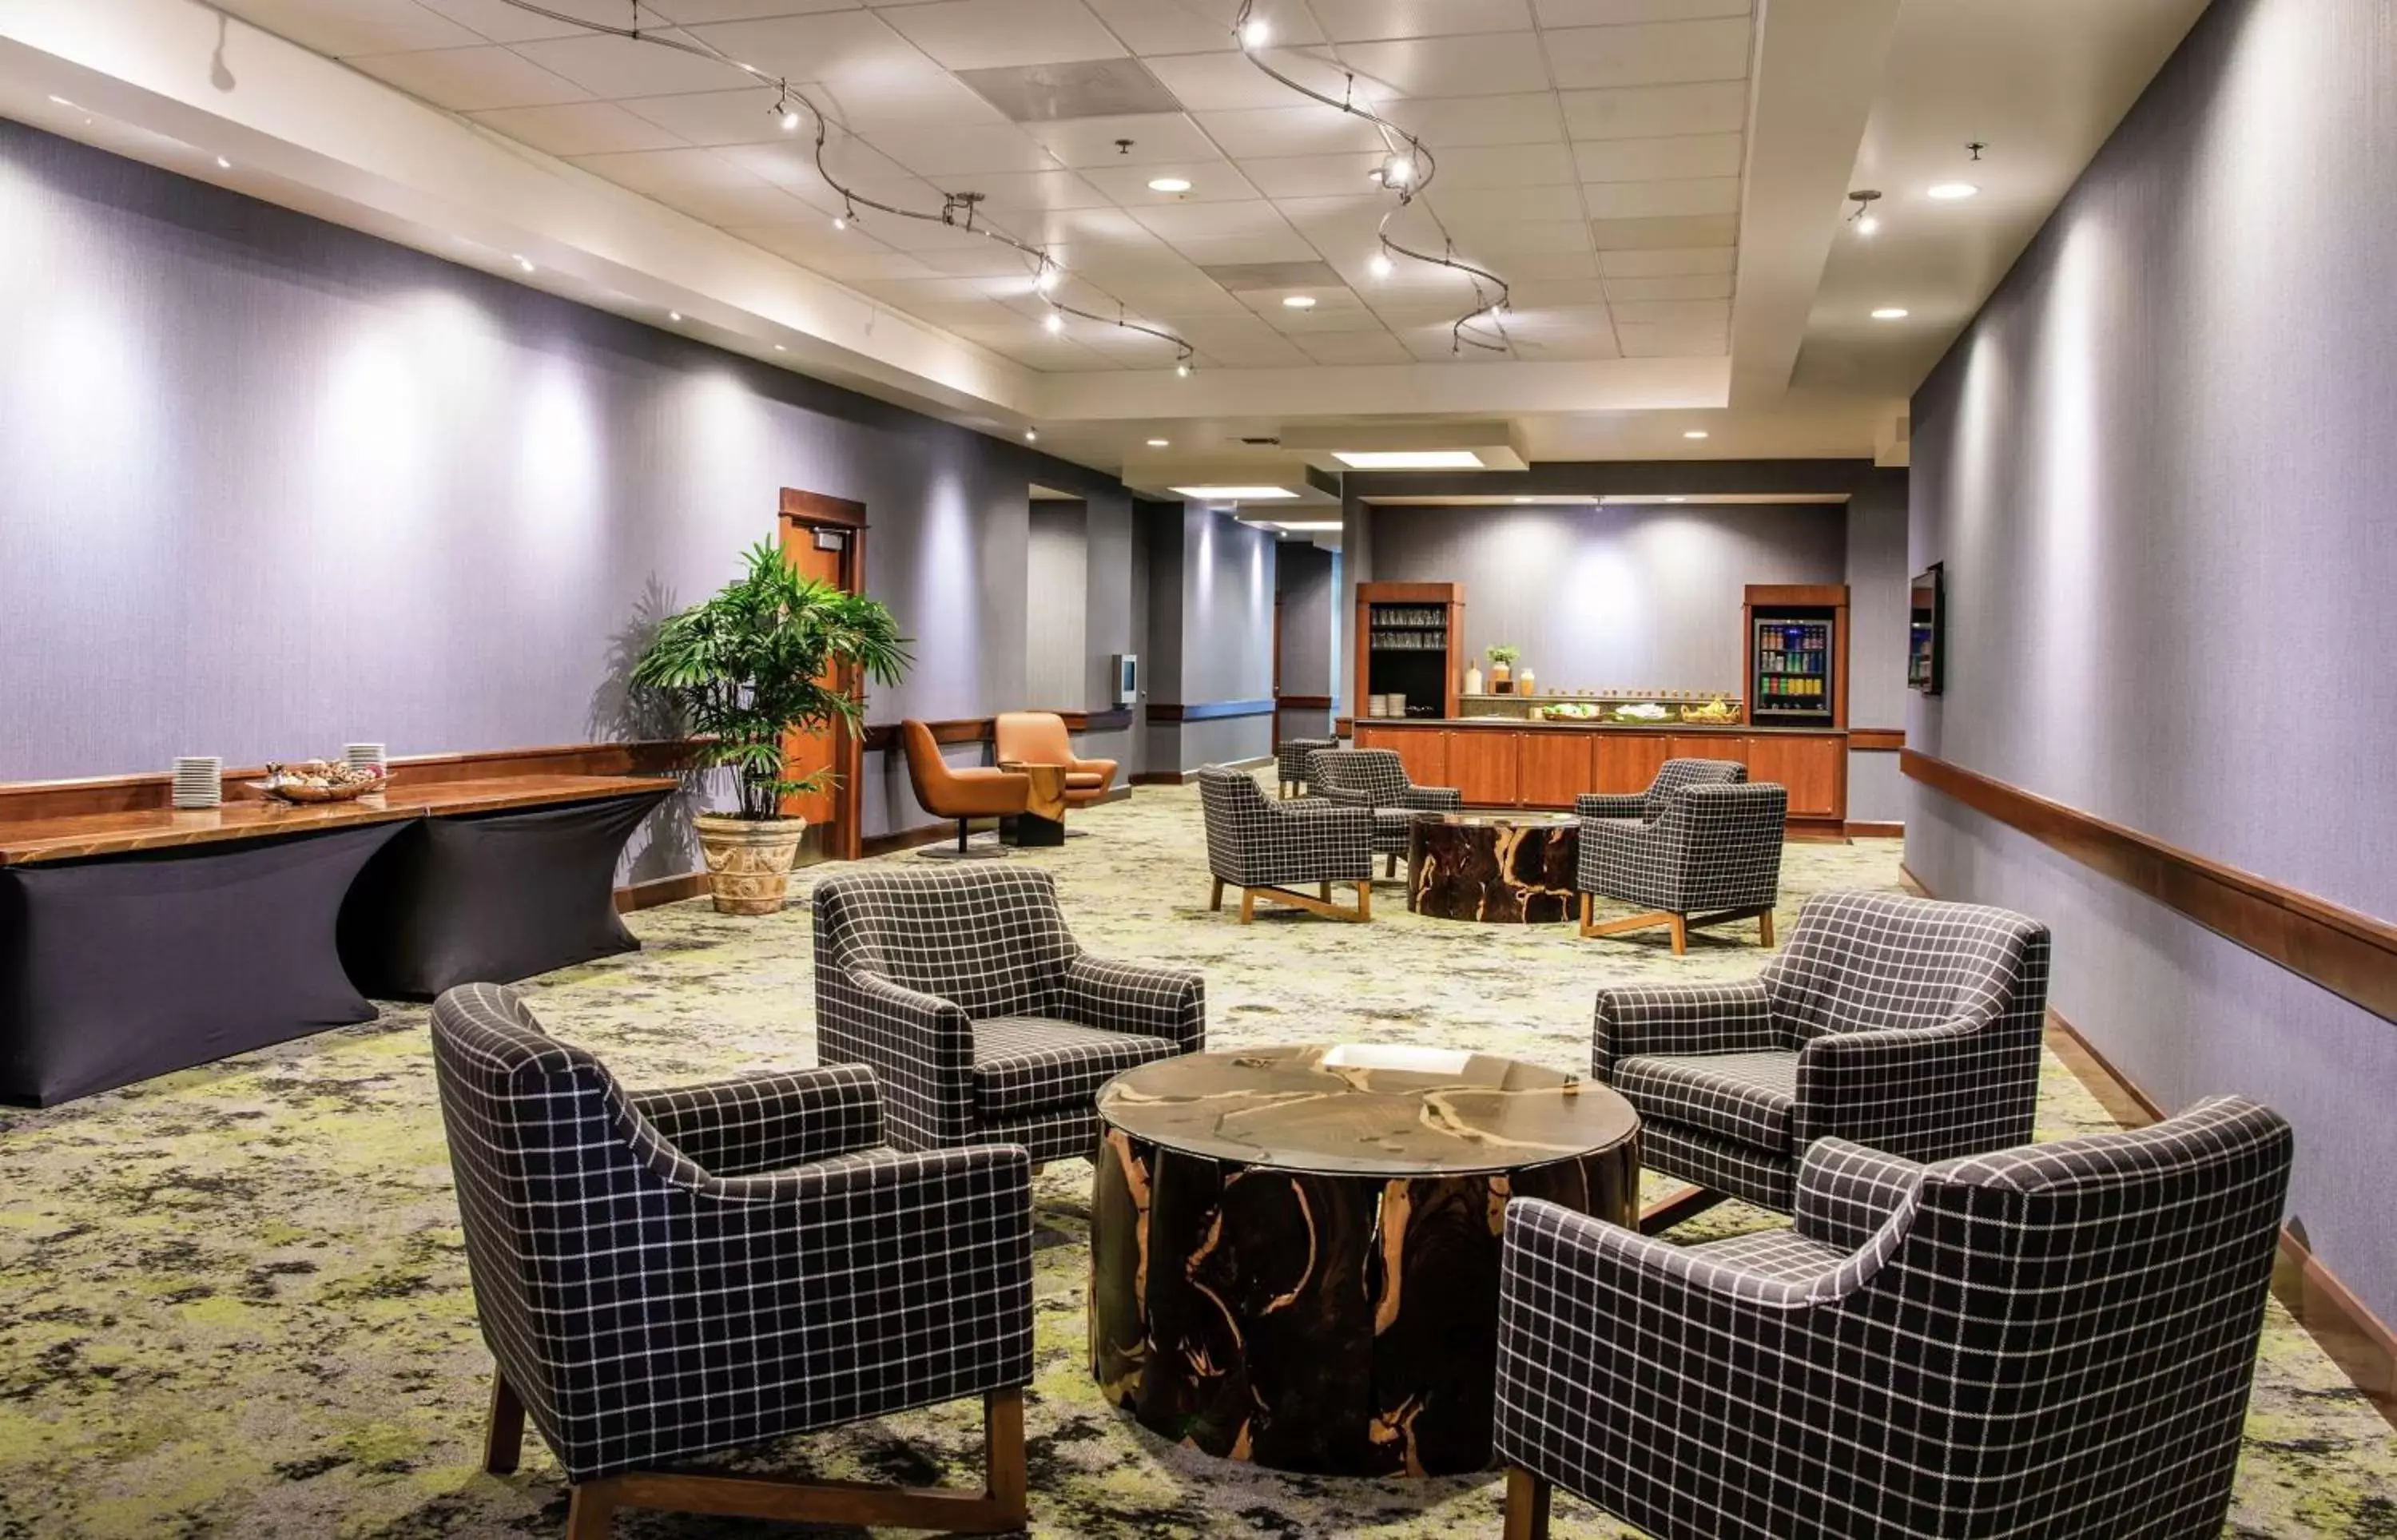 Meeting/conference room in DoubleTree by Hilton Portland